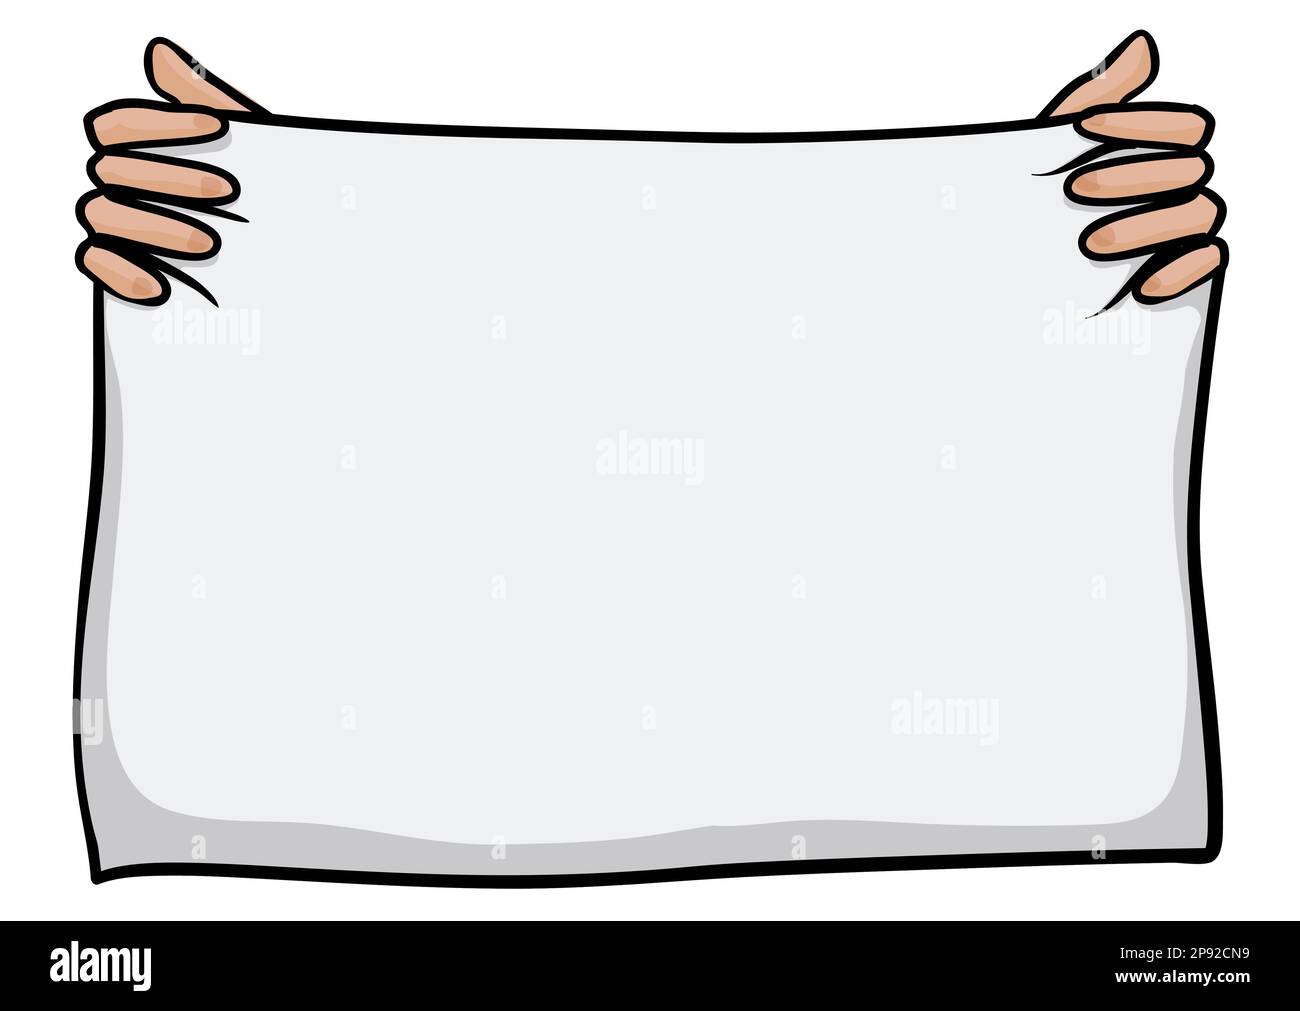 Template on blank sheet held by two hands. Design in cartoon style over white background. Stock Vector